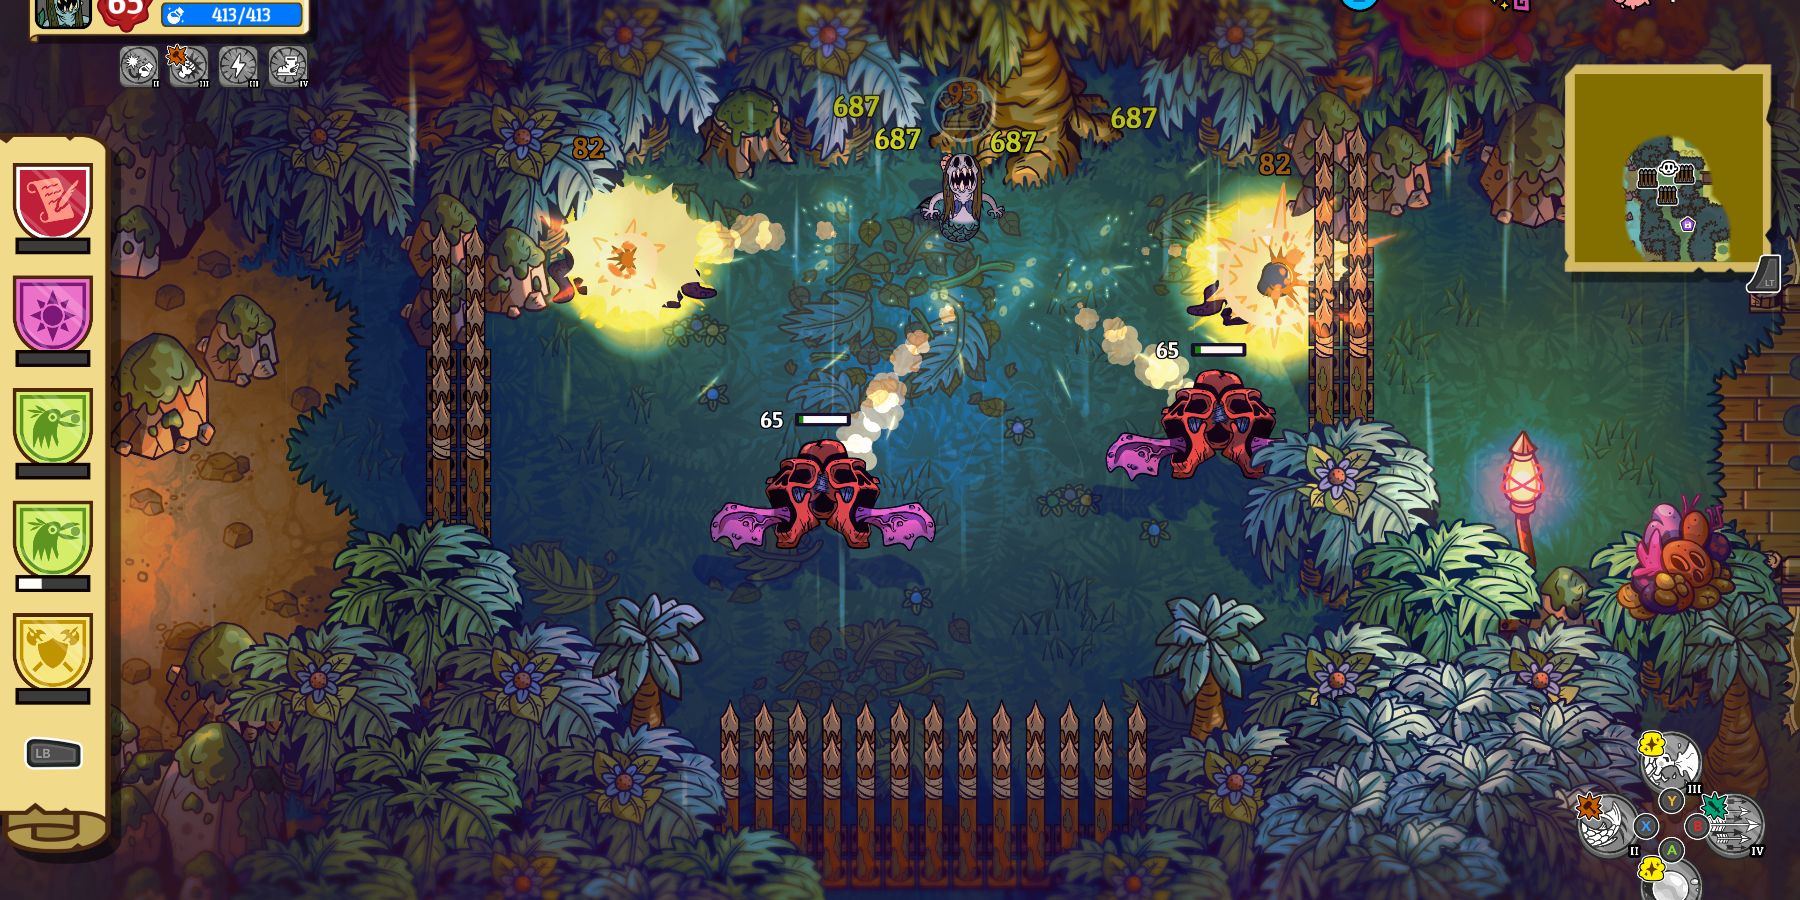 a horrific mermaid stands in the middle of a clearing surrounded by wooden spikes. Several, red, winged, monstrous enemies with red skulls for bodies have been pushed away from her by a powerful attack